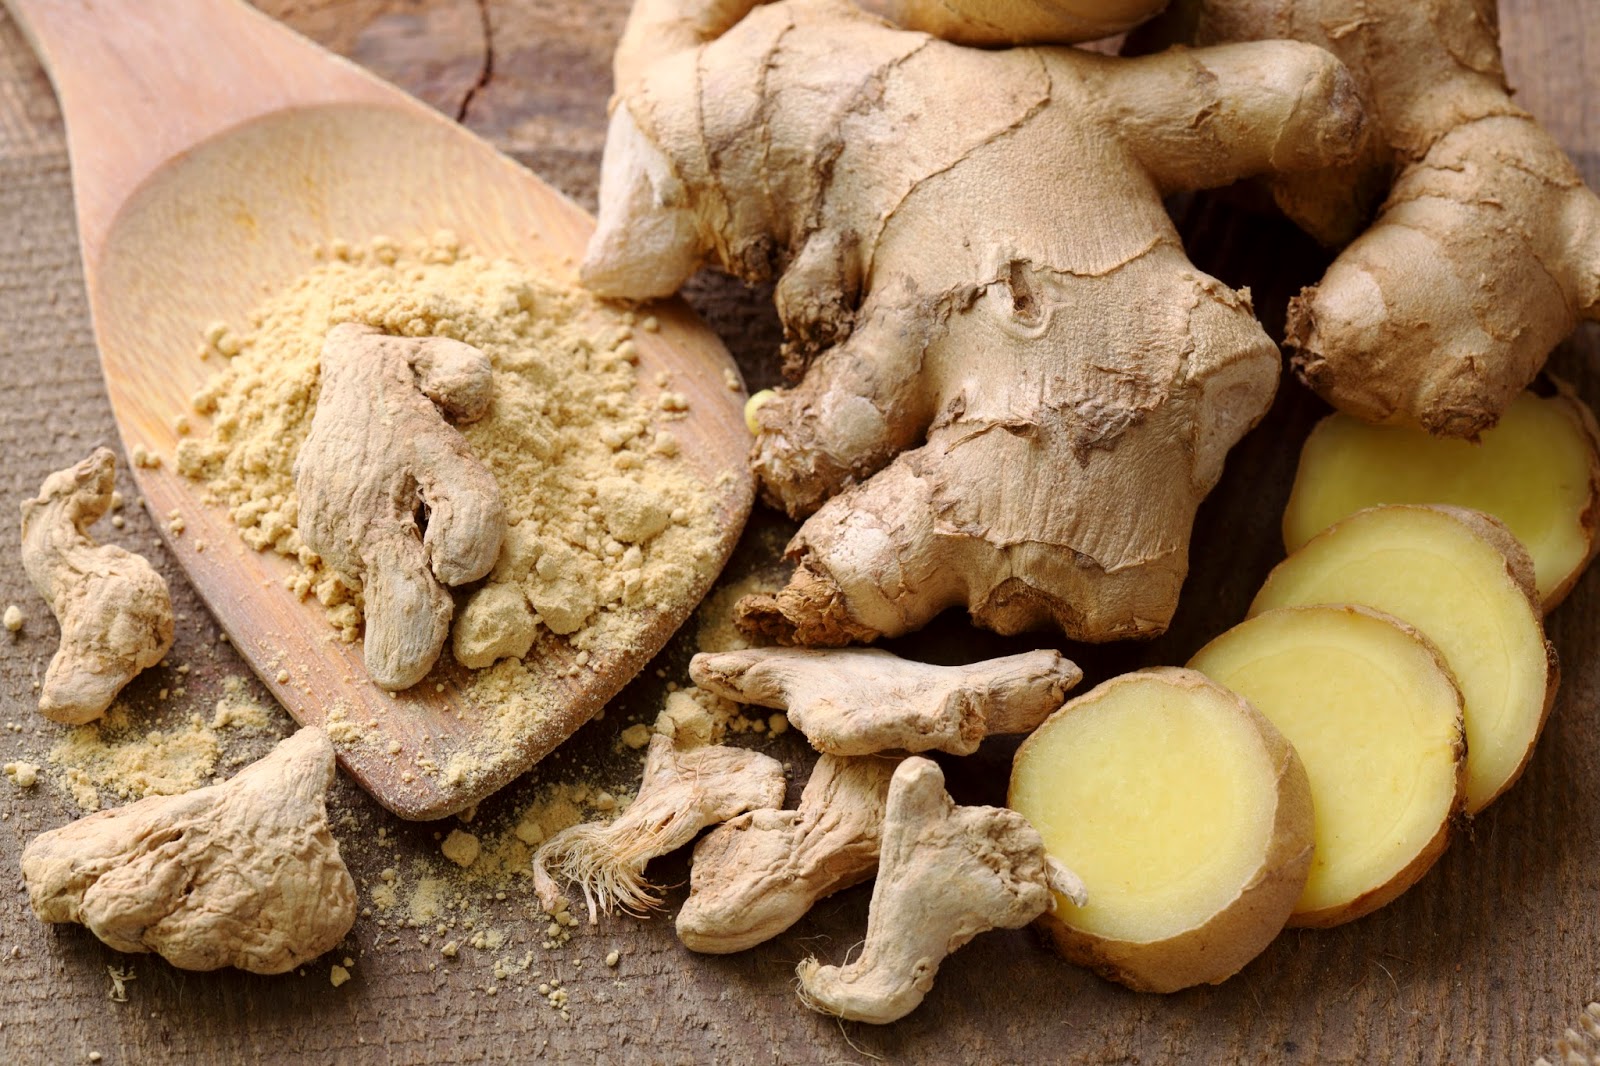 Ginger Root Benefits